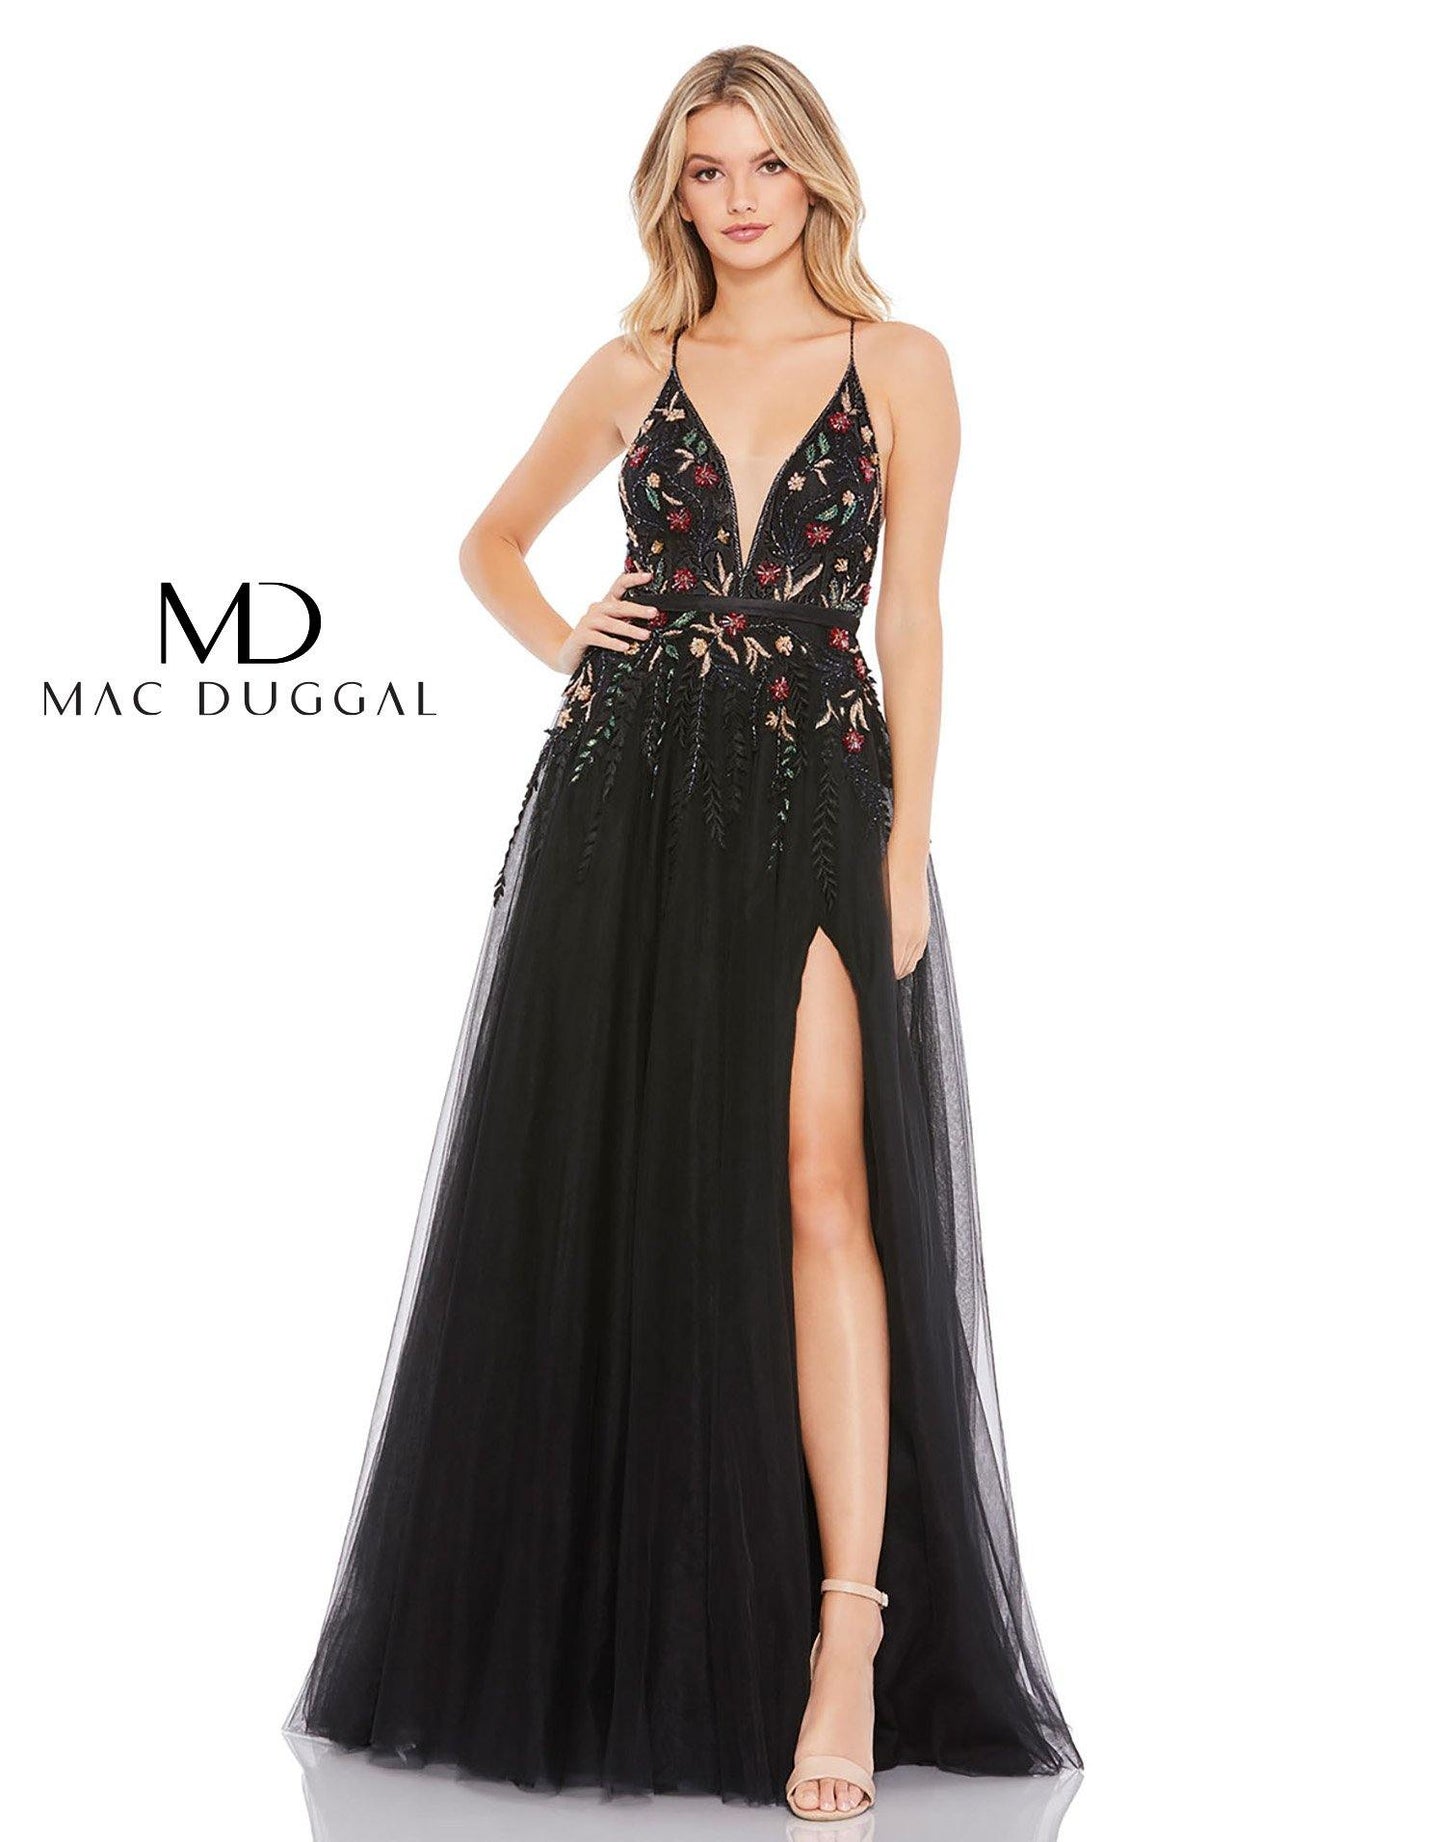 Mac Duggal Long Spaghetti Strap Prom Dress 11193 - The Dress Outlet